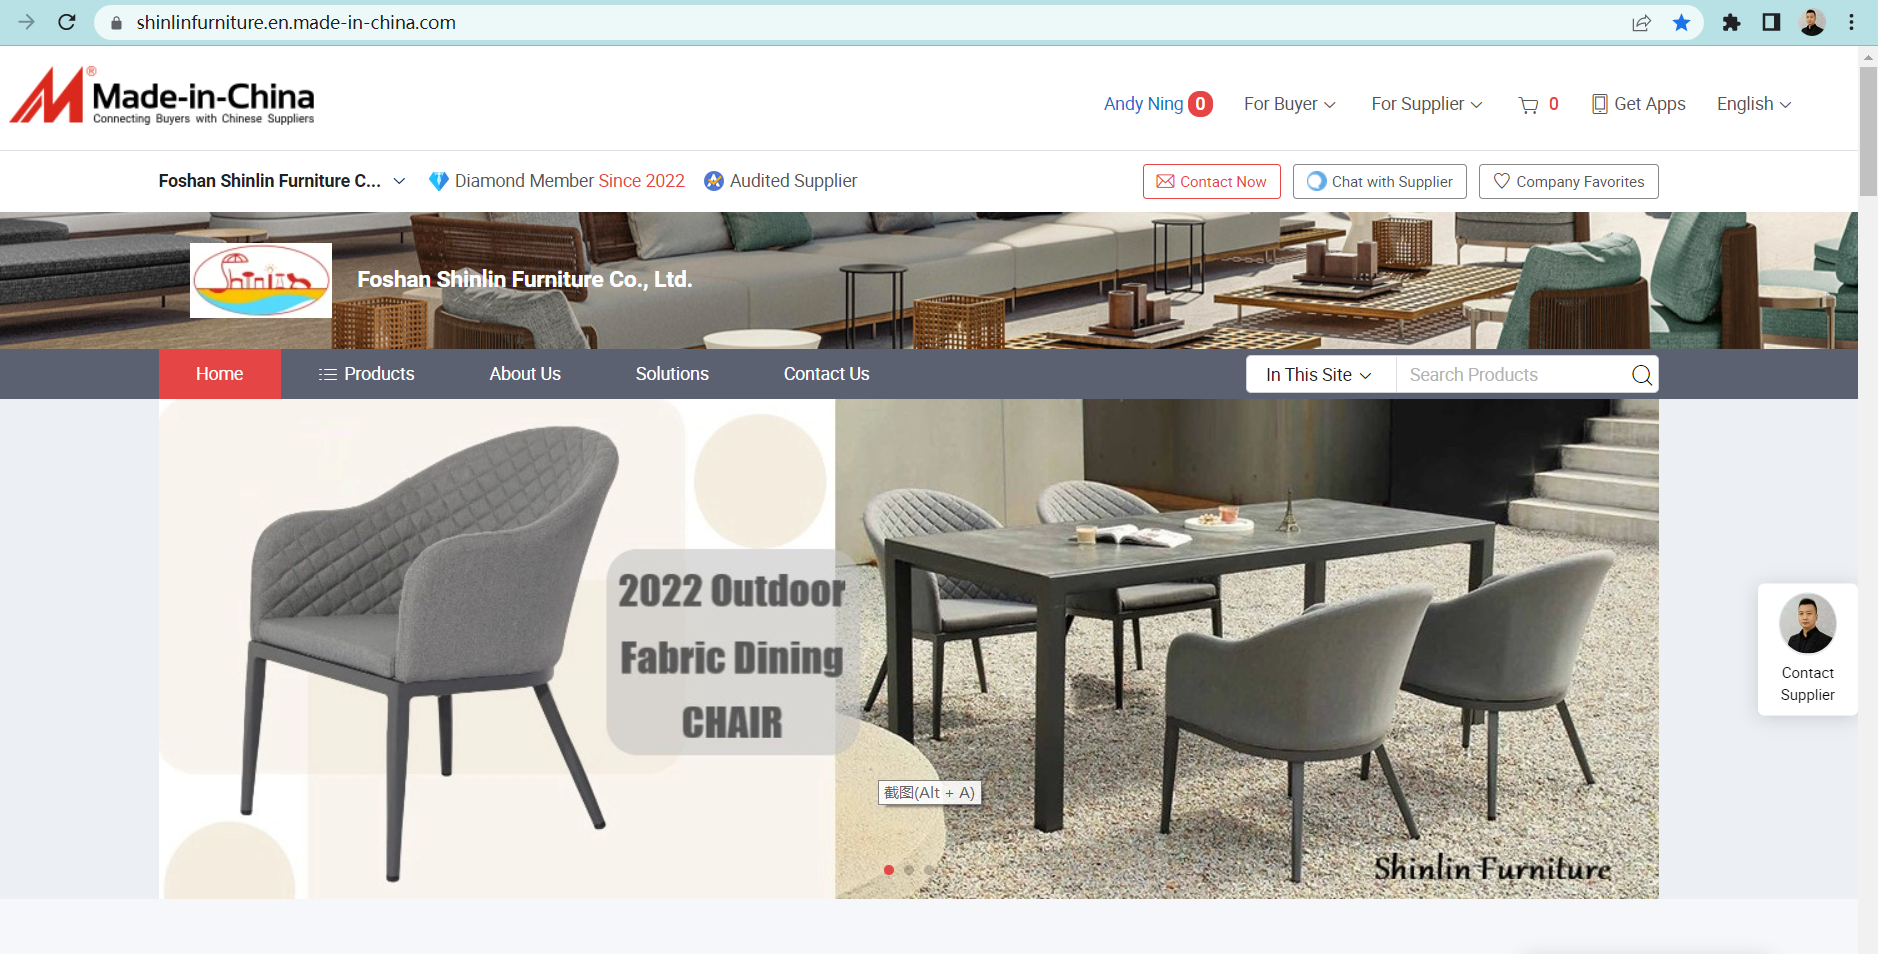 Shinlin Furniture on Made-in-china